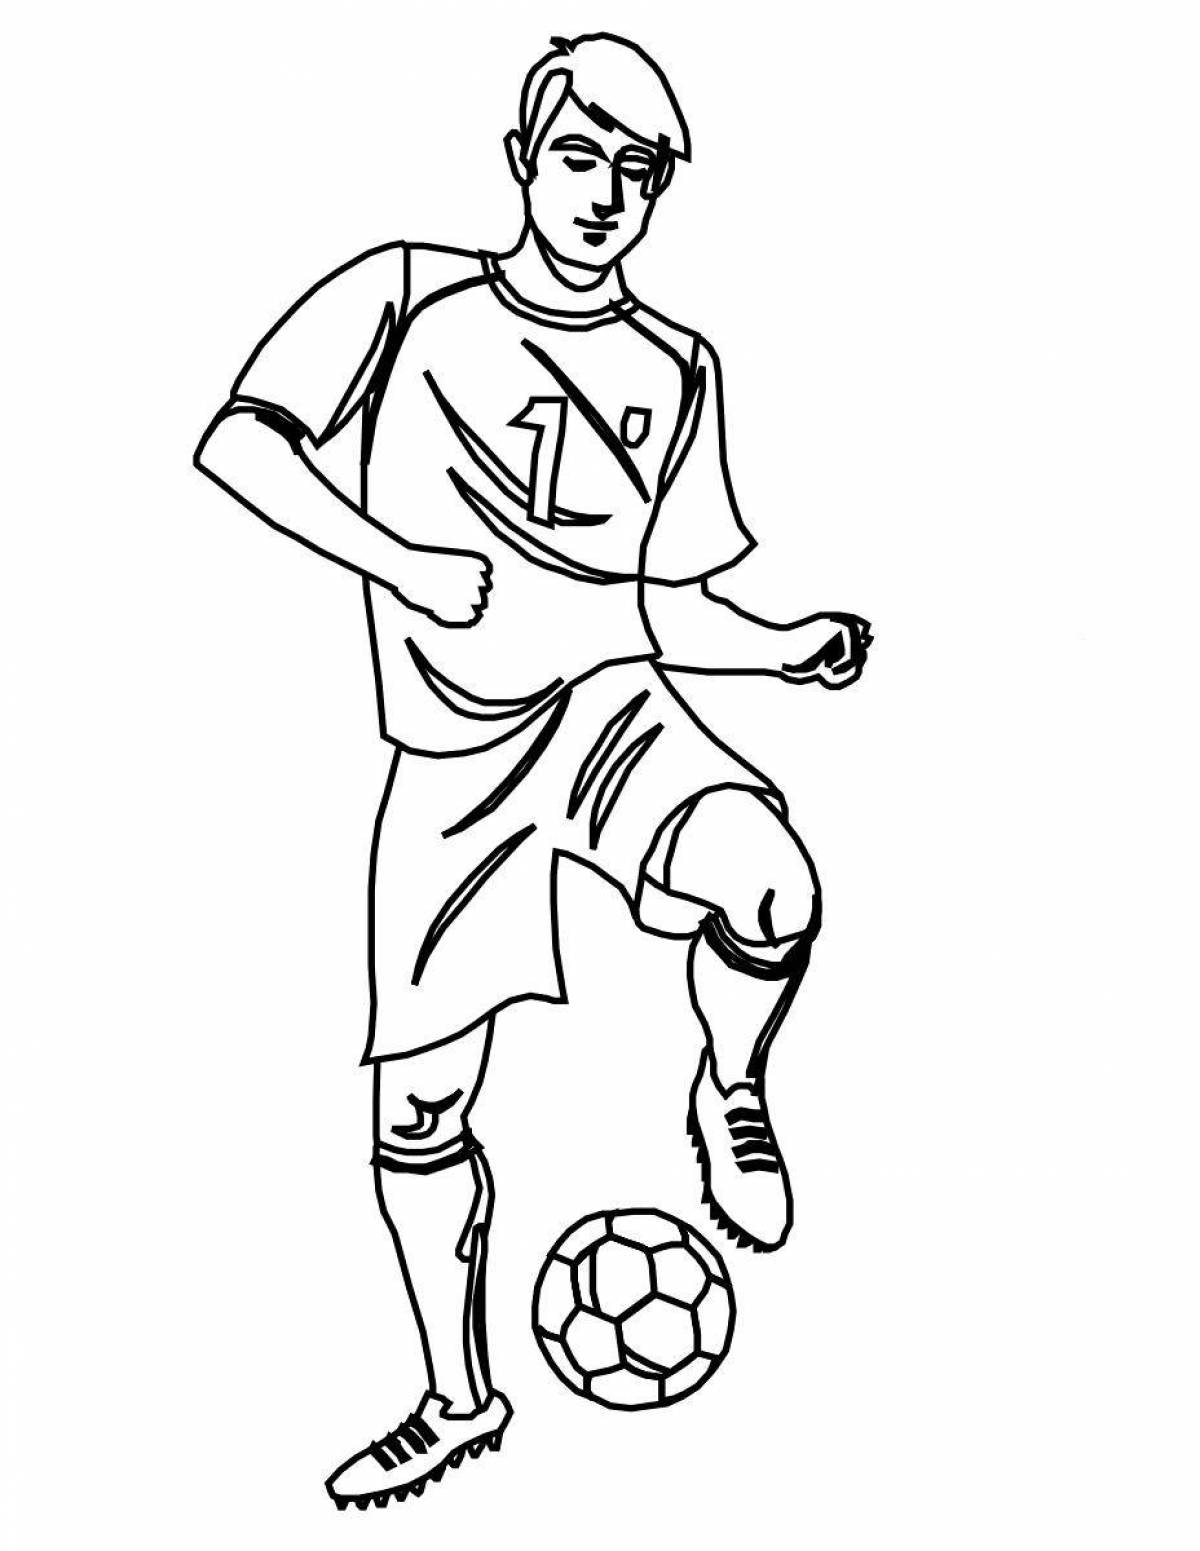 Coloring book amazing football